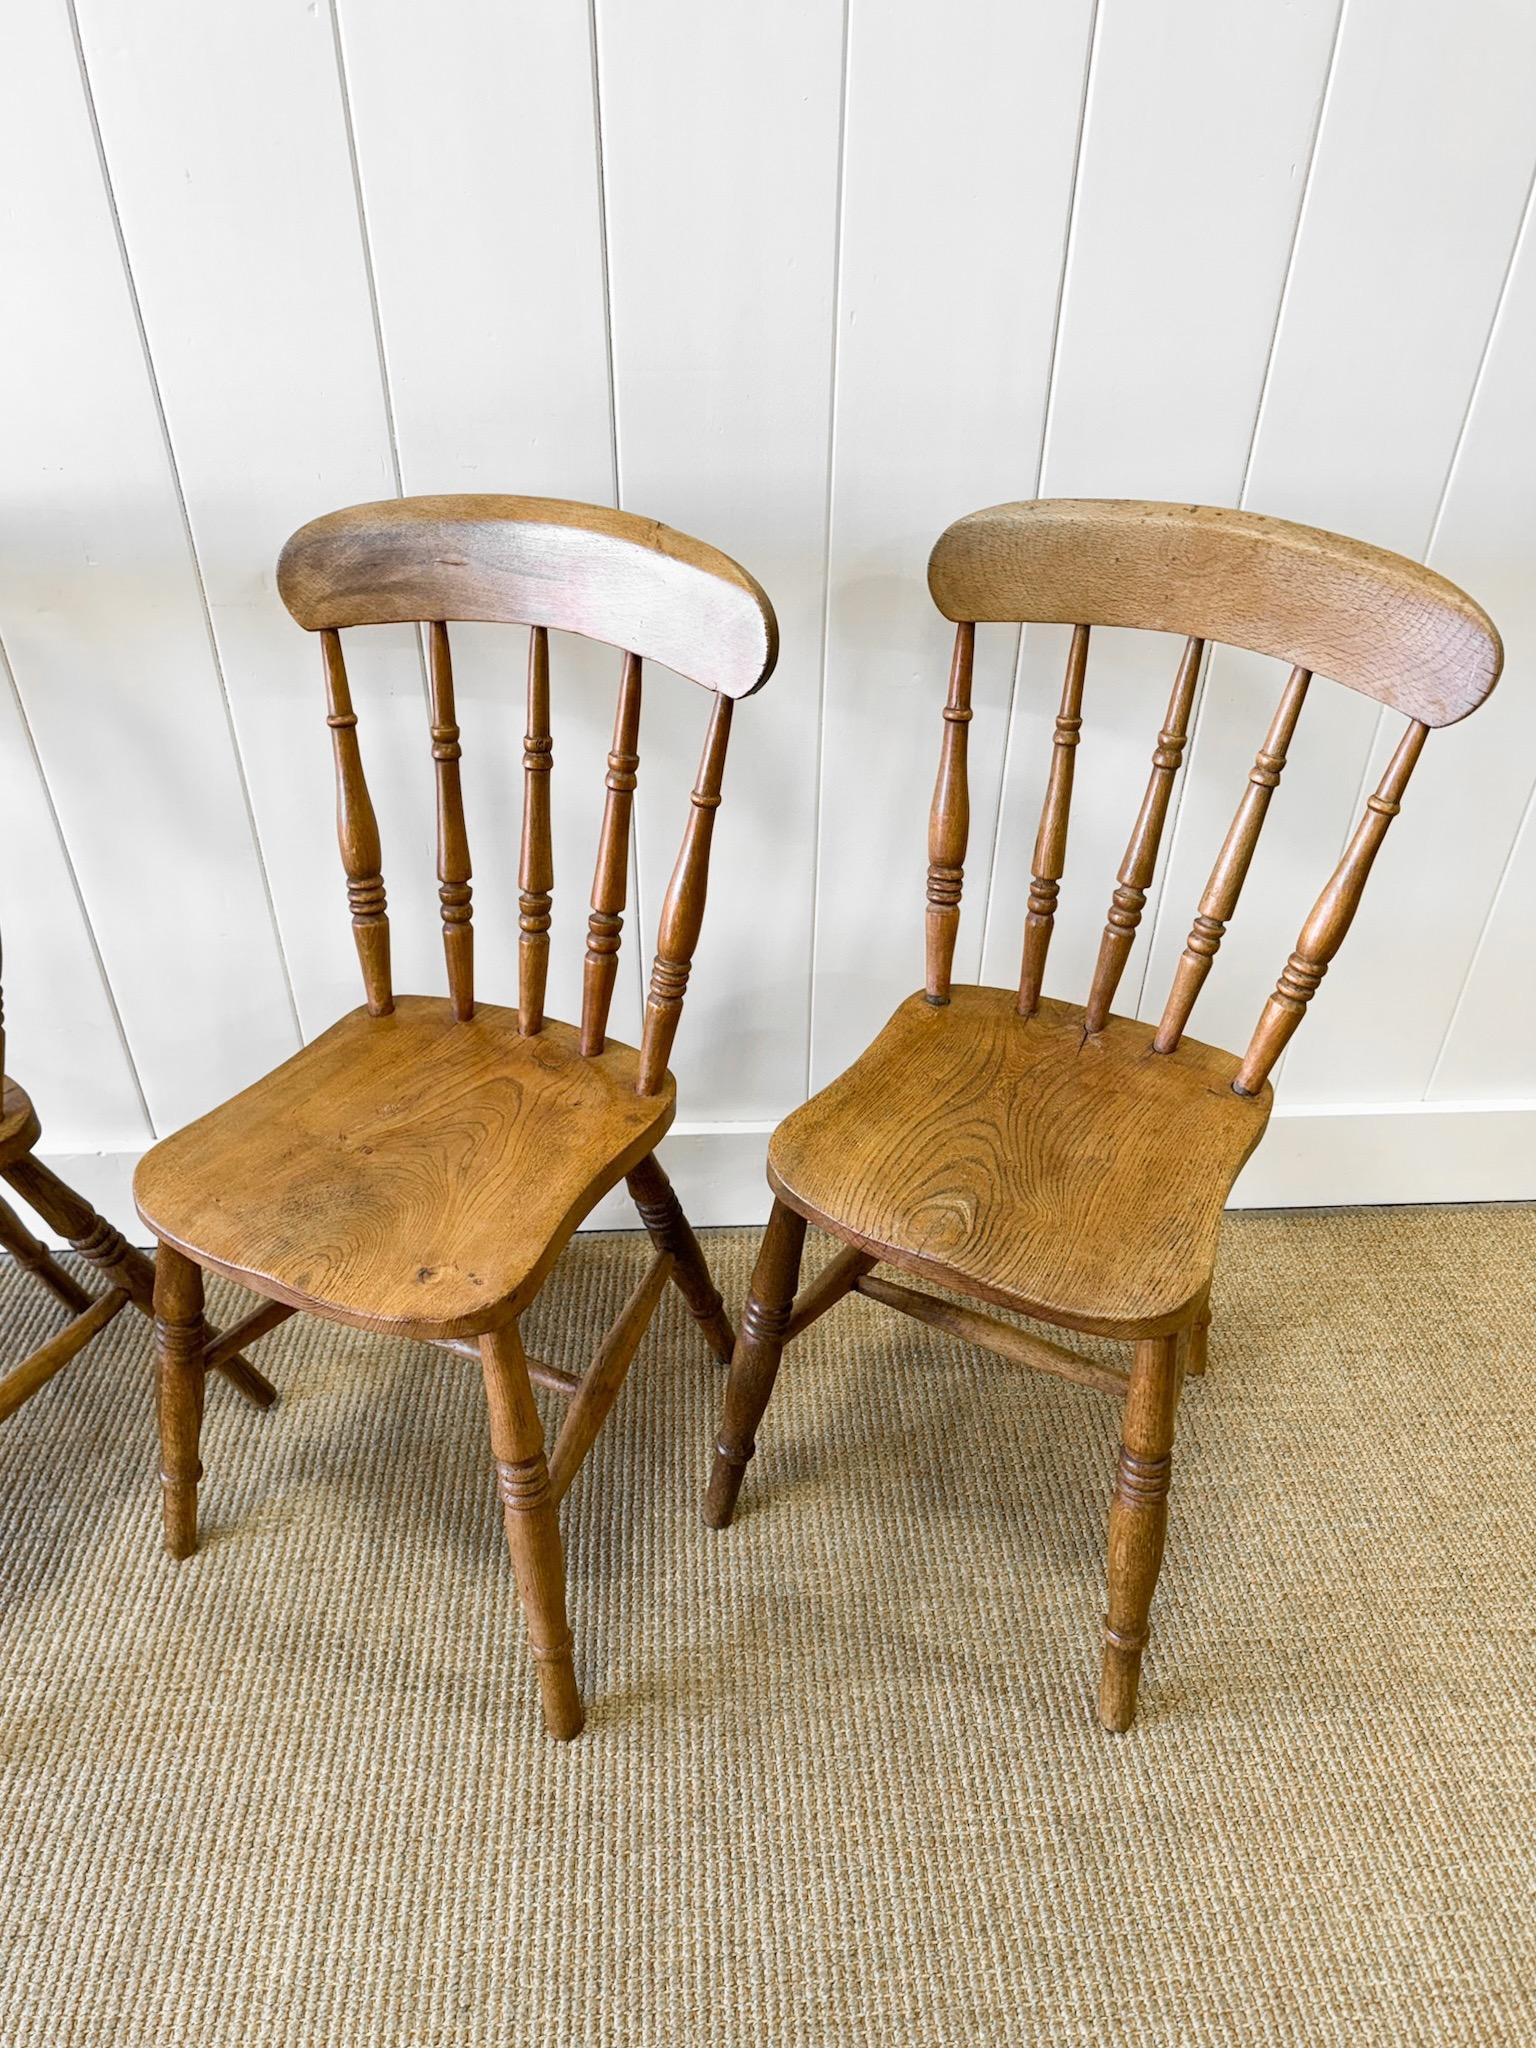 British An Antique Set of 4 Spindle Back Chairs For Sale